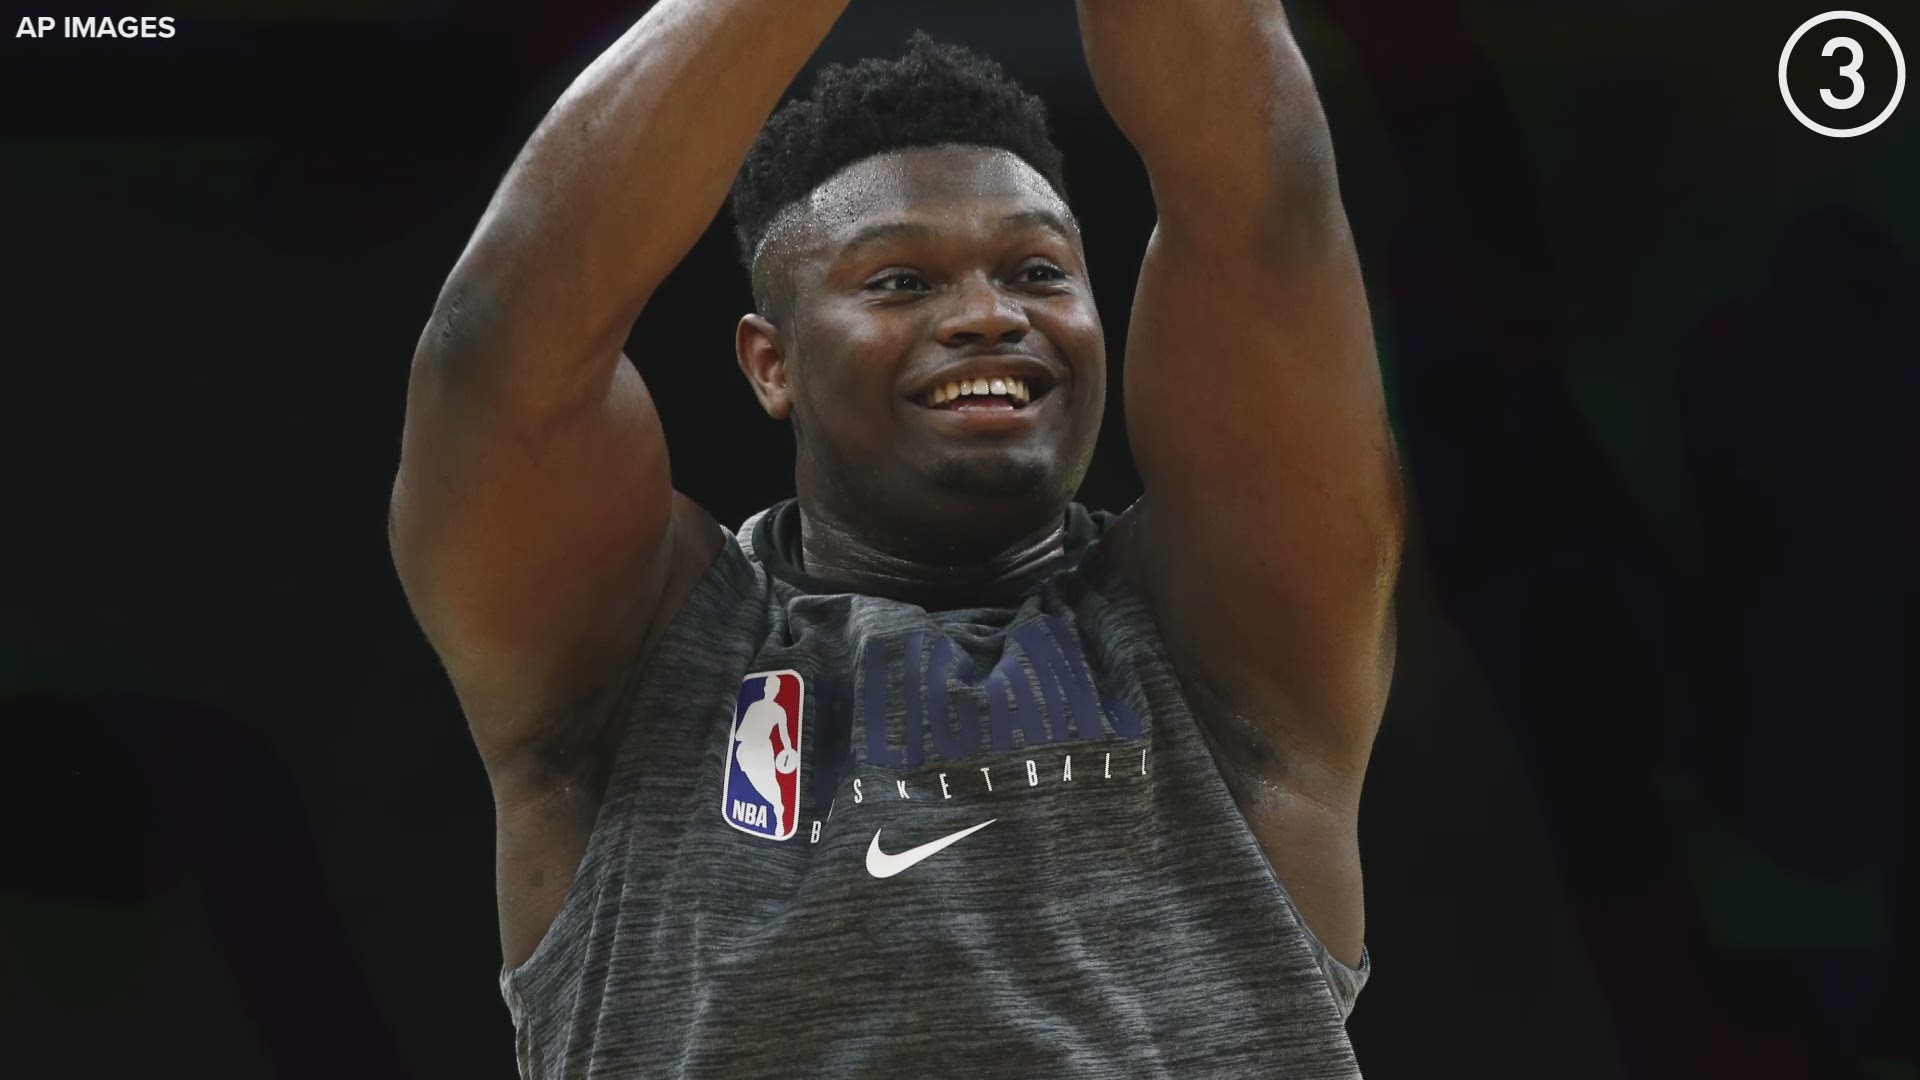 Zion Williamson 'very poised' in NBA debut, scores 17 in fourth quarter